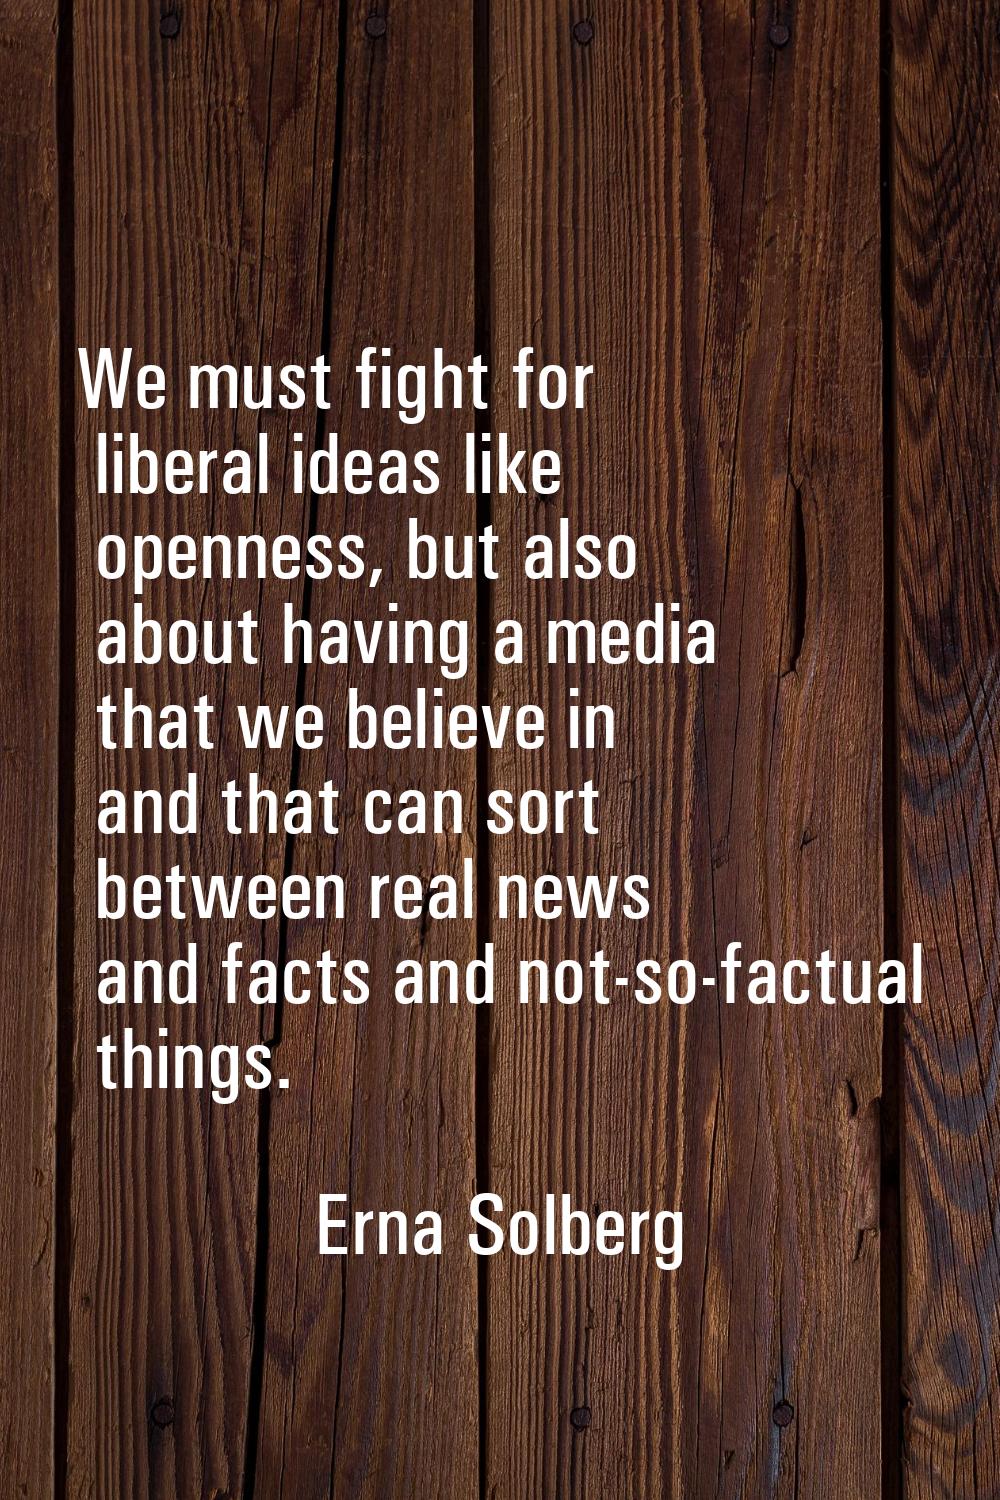 We must fight for liberal ideas like openness, but also about having a media that we believe in and